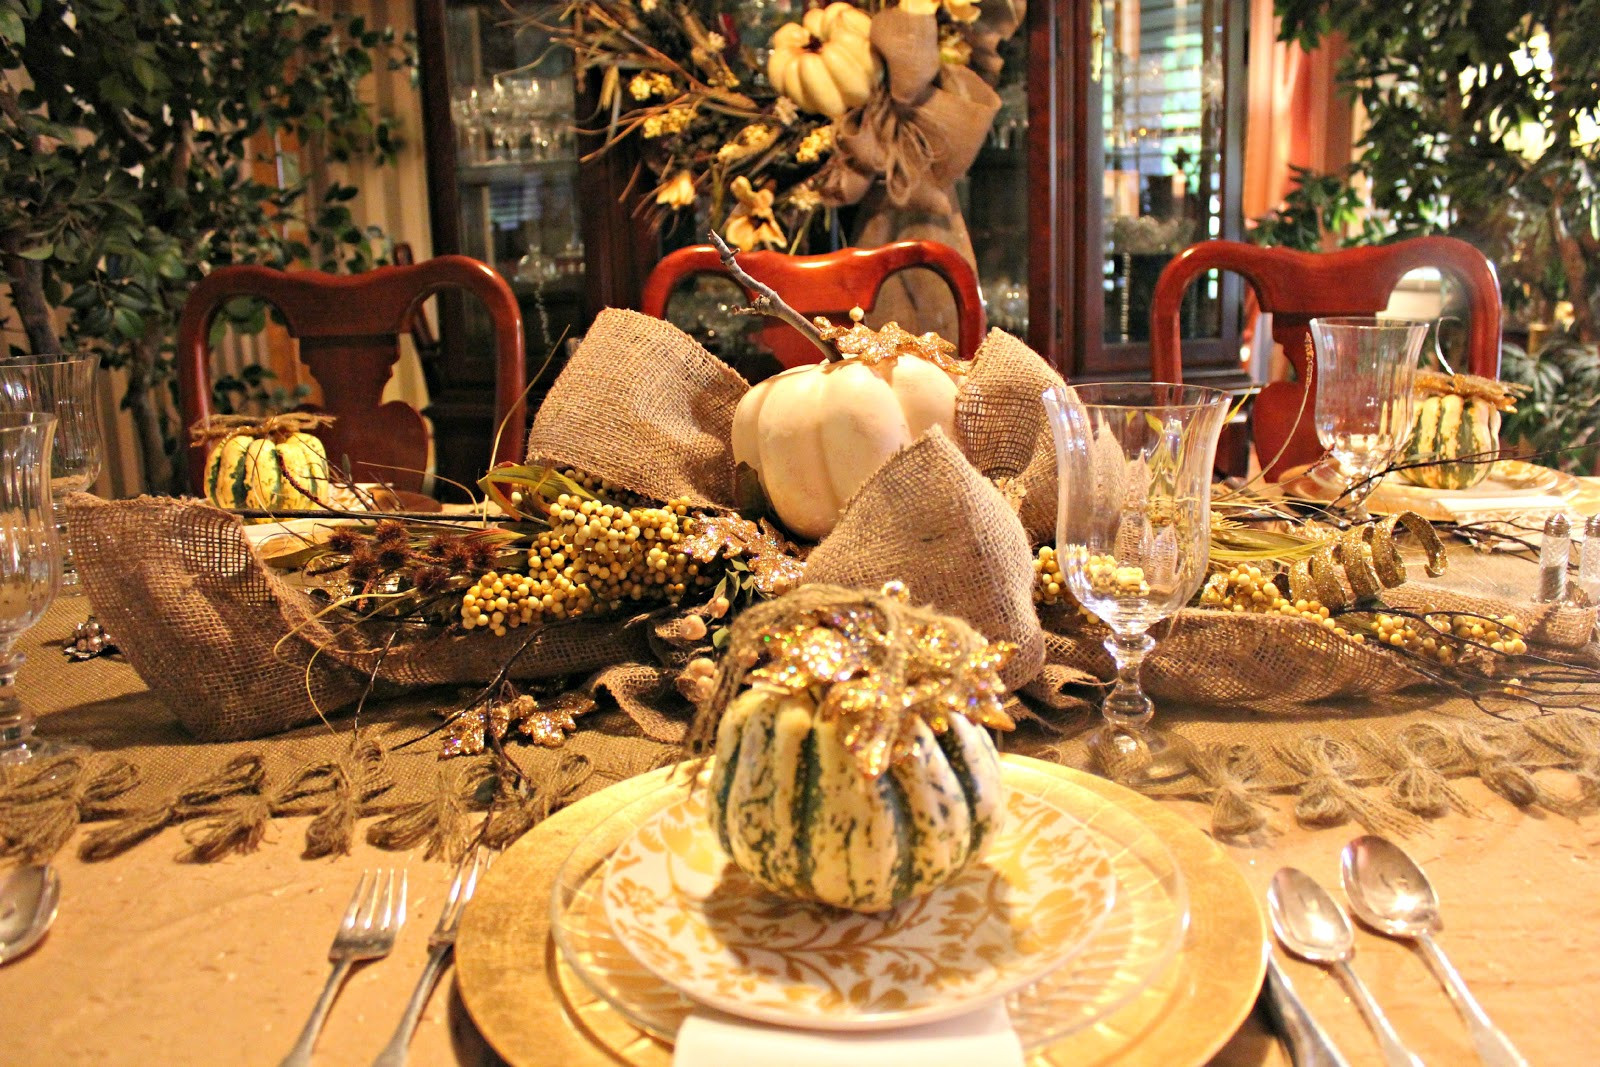 Thanksgiving Dinner Decorations
 My Sister s Crazy THANKSGIVING TABLE STETTING AND DECORATION